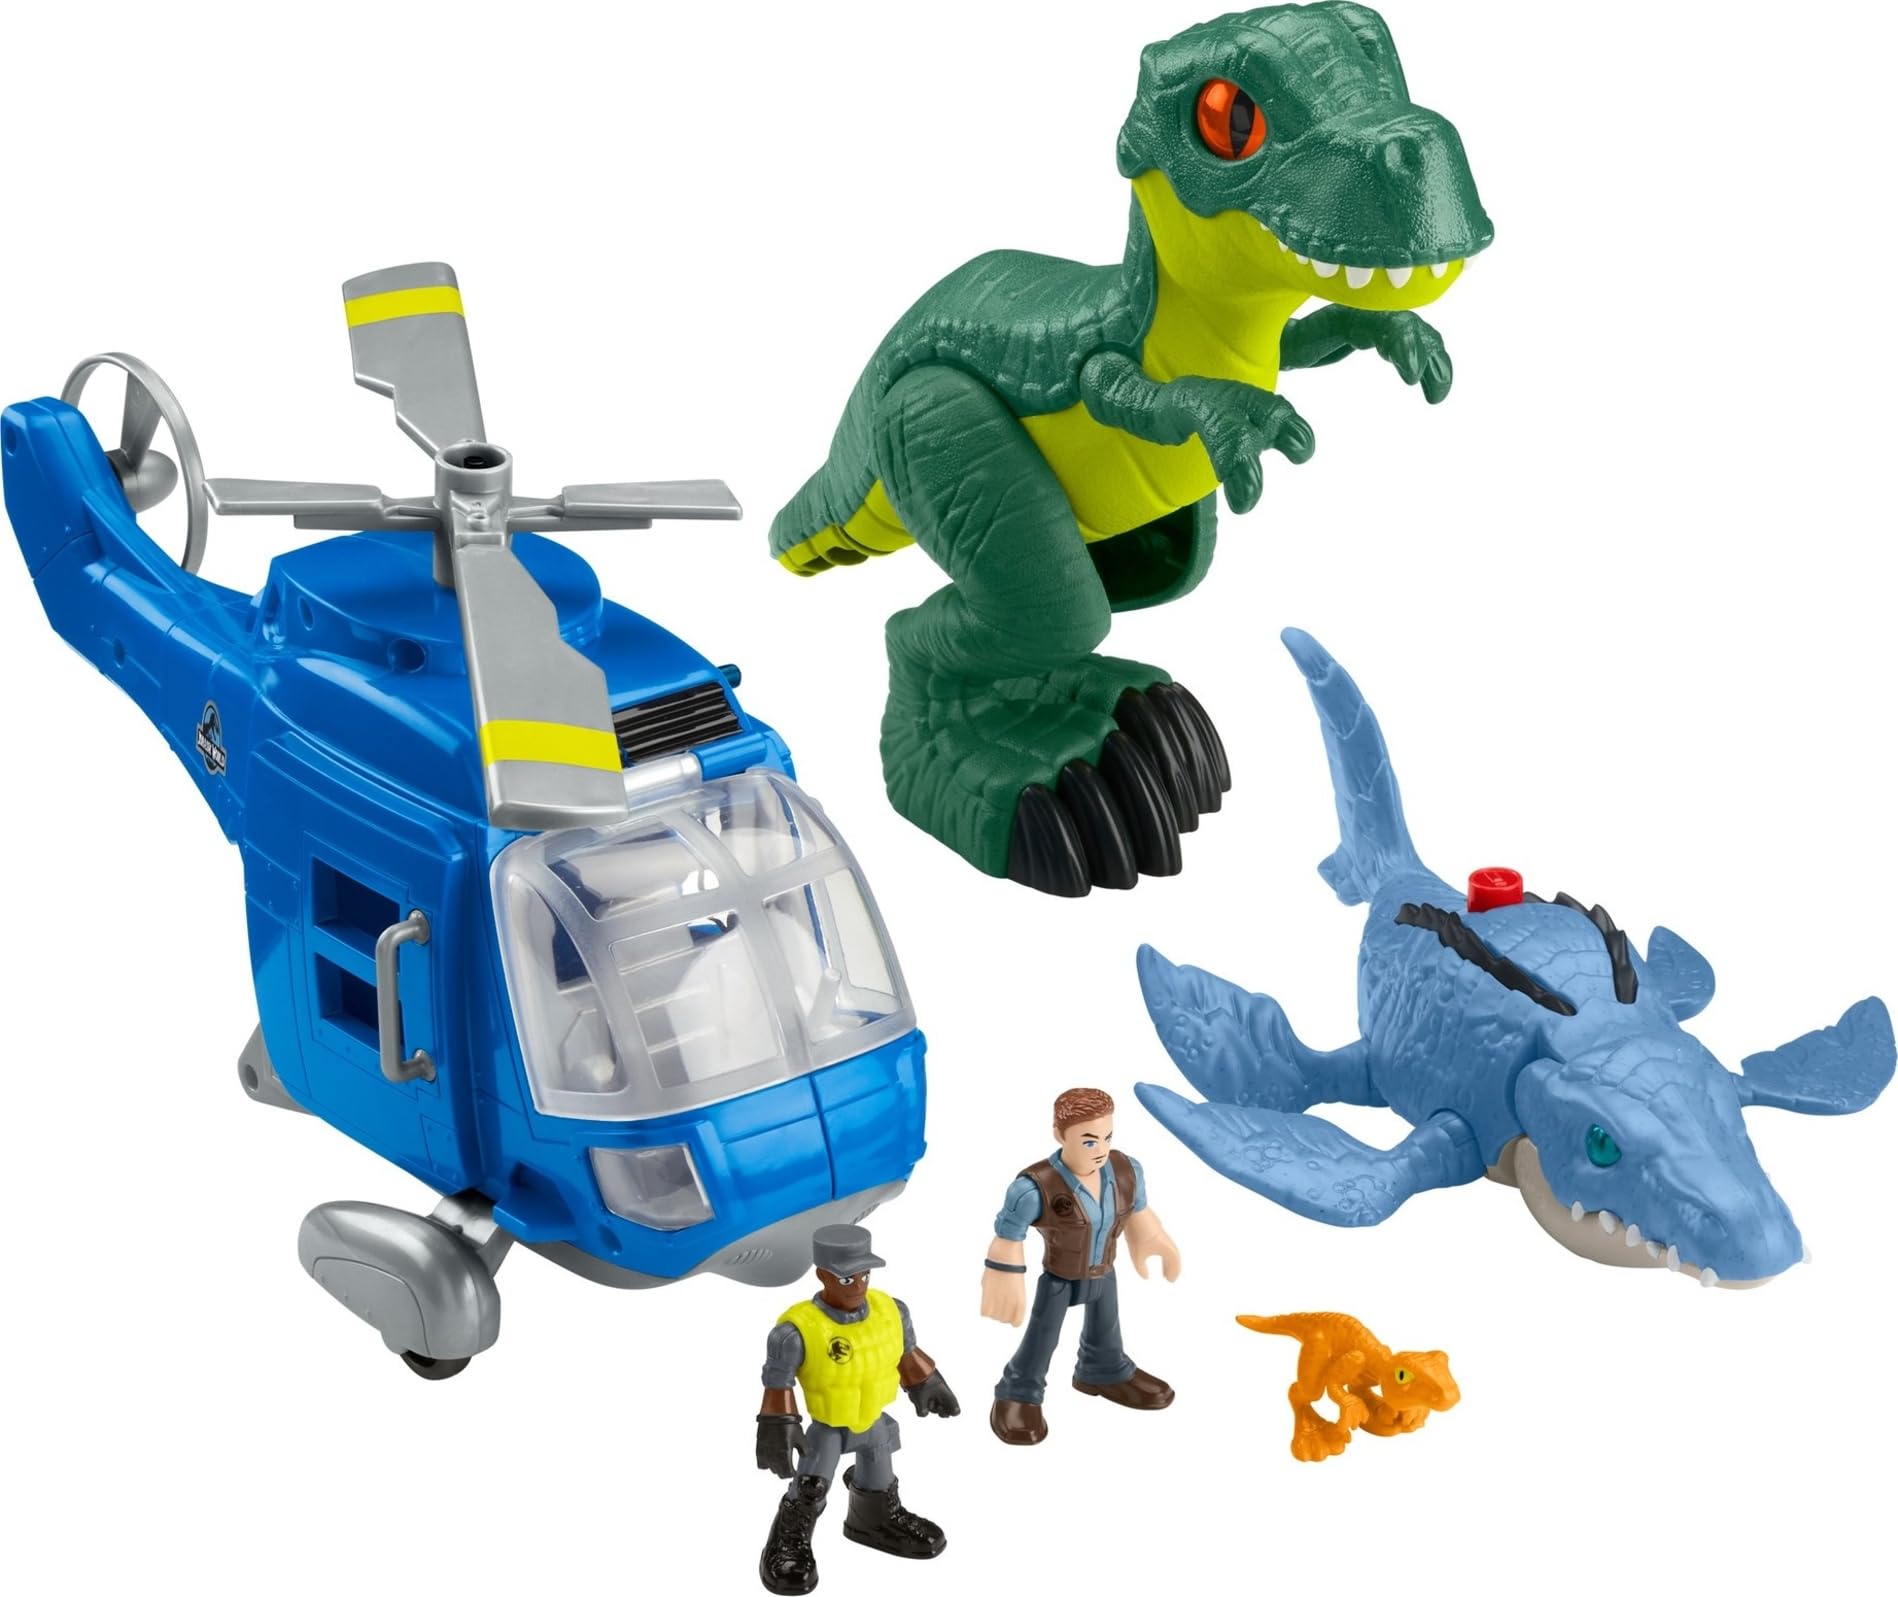 6-Piece Fisher-Price Imaginext Jurassic World Dinosaur Toys $20.16 + Free Shipping w/ Prime or on $35+